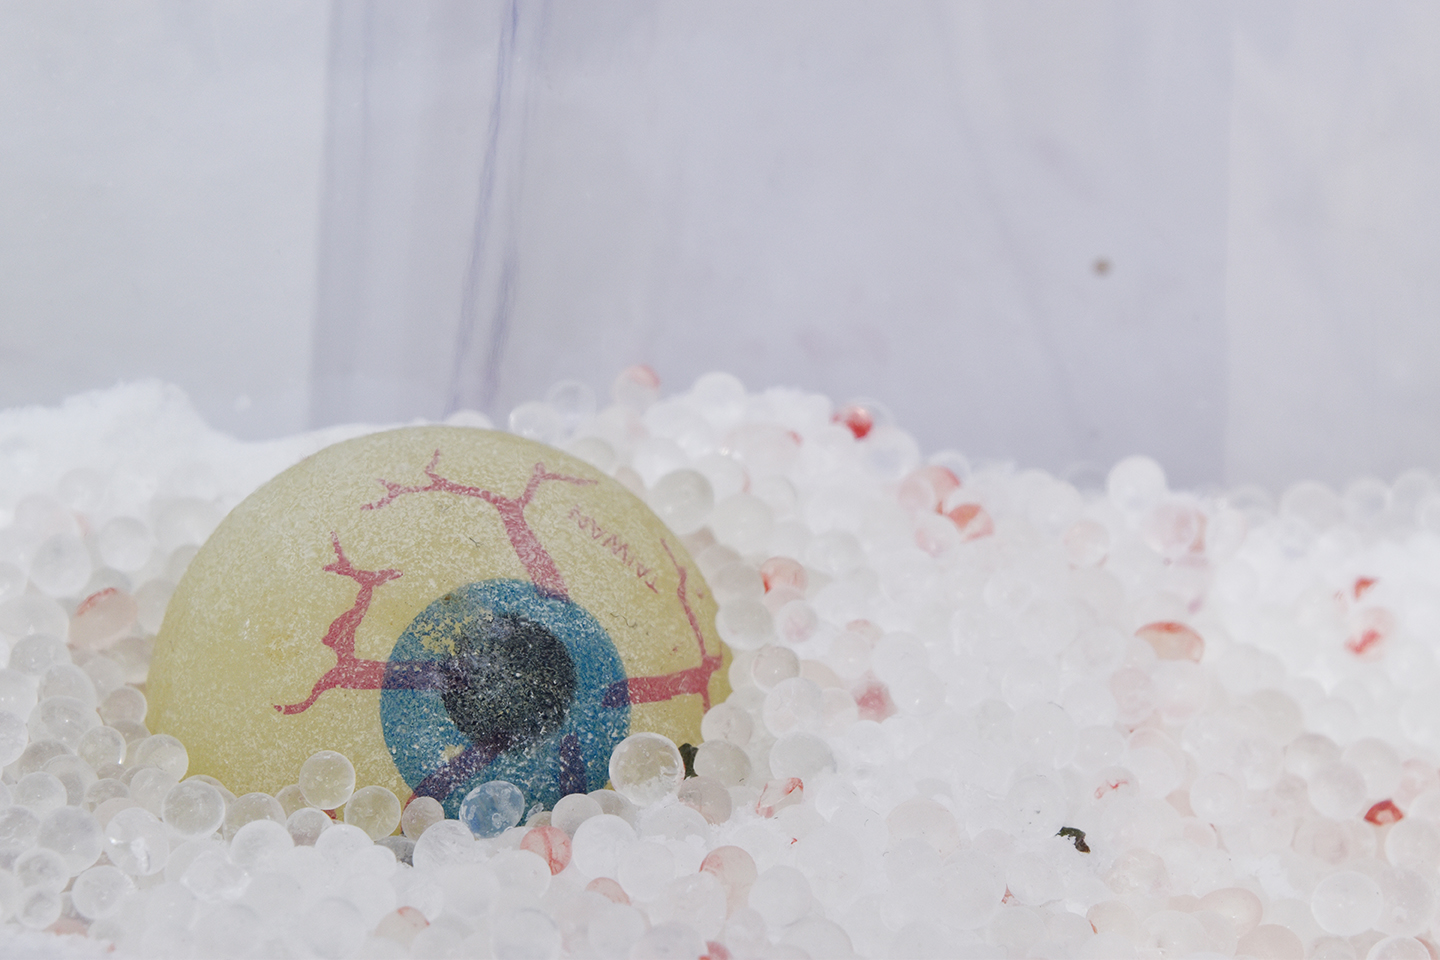 Lauren Gault, hereness is fulll of thereness. 2017, Welded PVC, water, polymer balls, worn contact lenses - salt, silica, silica eaten peeled lychees, petroleum jelly, laser cut broken acryllic, glow in the dark eyeball, fork, human and silica eaten strawberries. Variable dimensions. (detail).